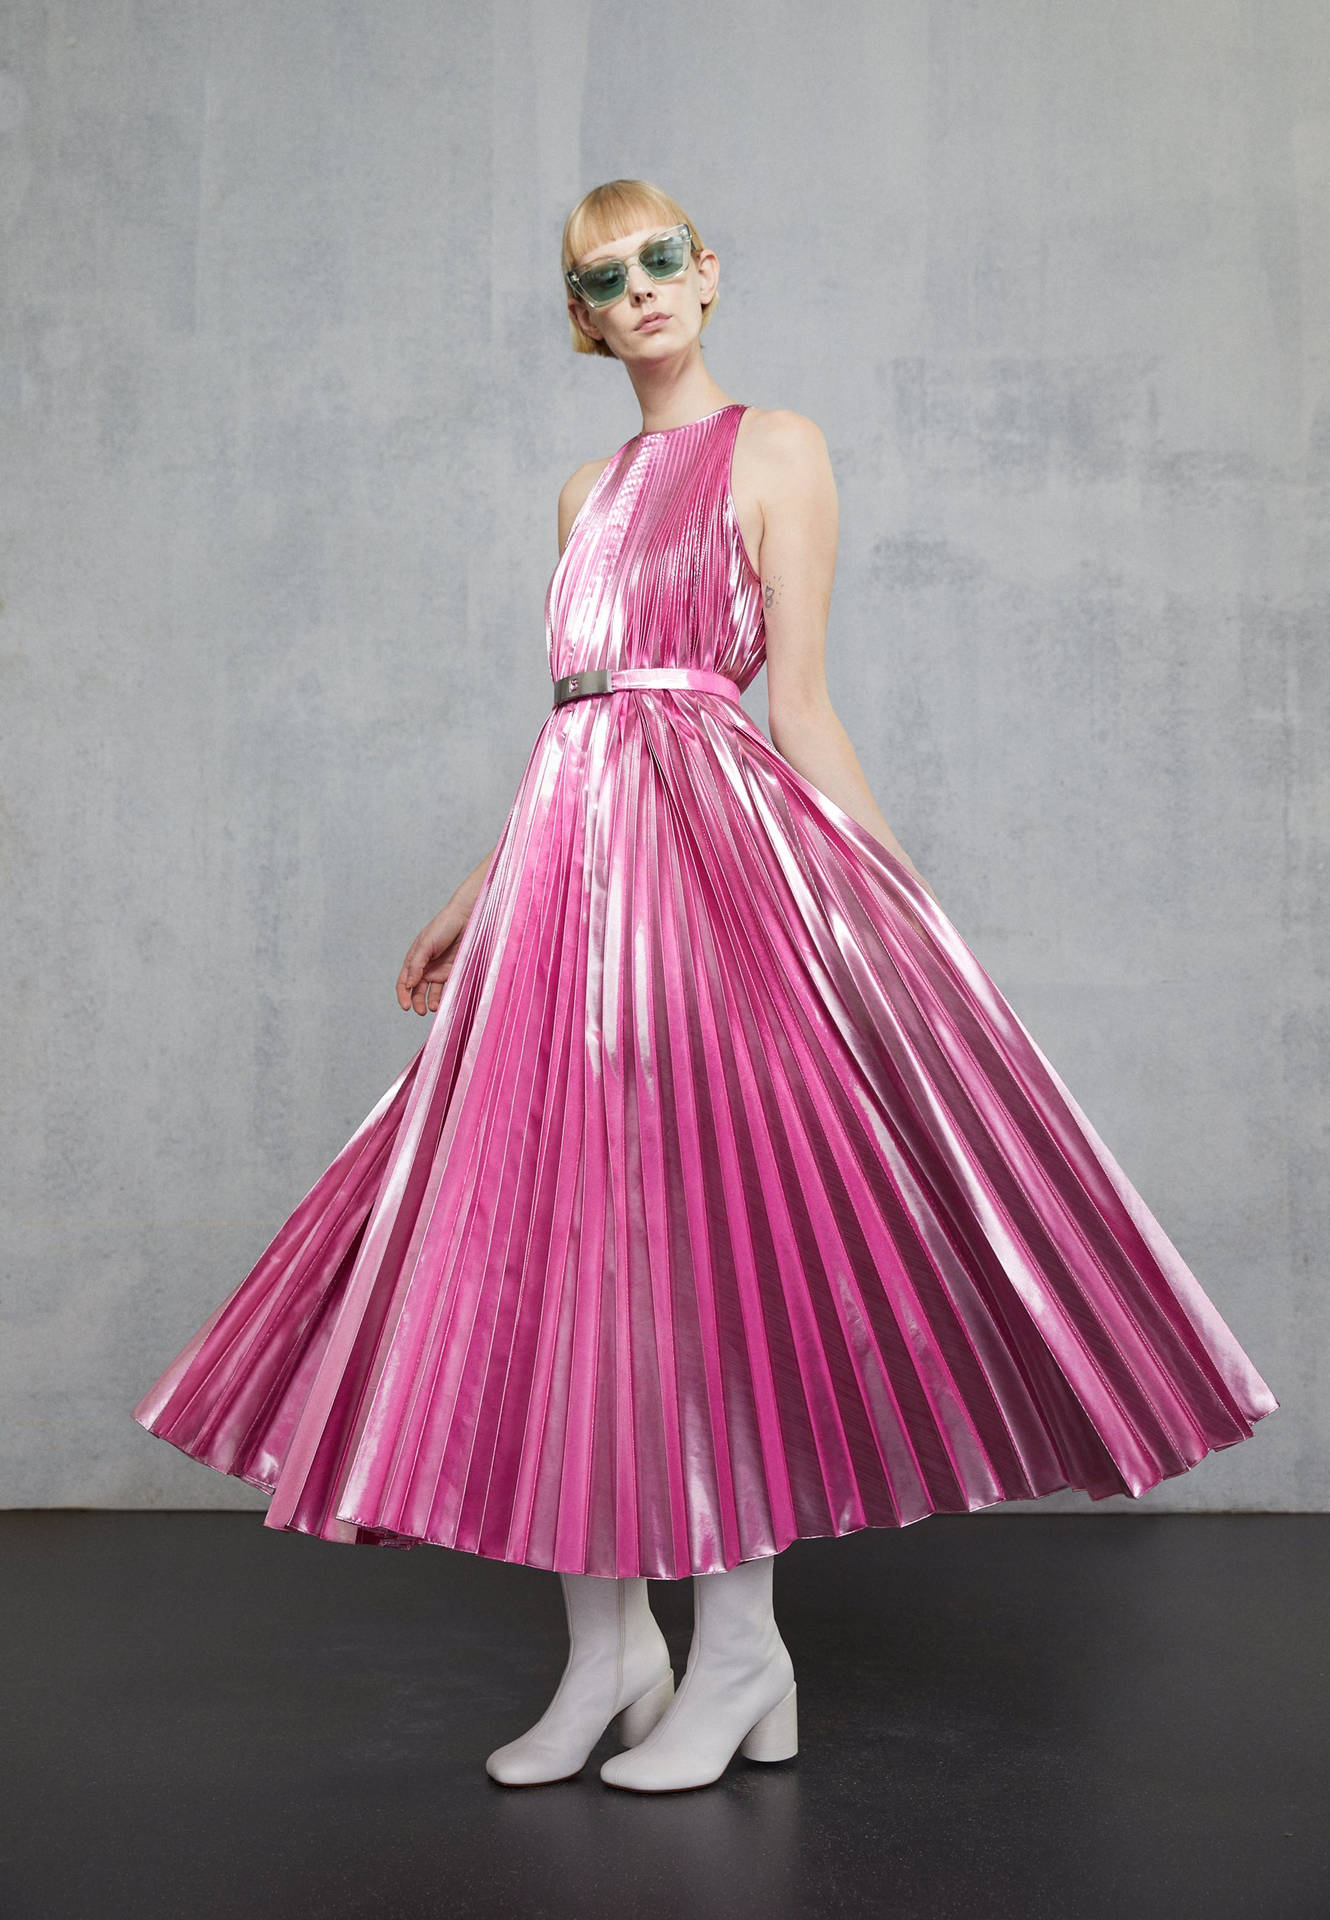 Christopher Kane Pink Pleated Flowy Dress Background